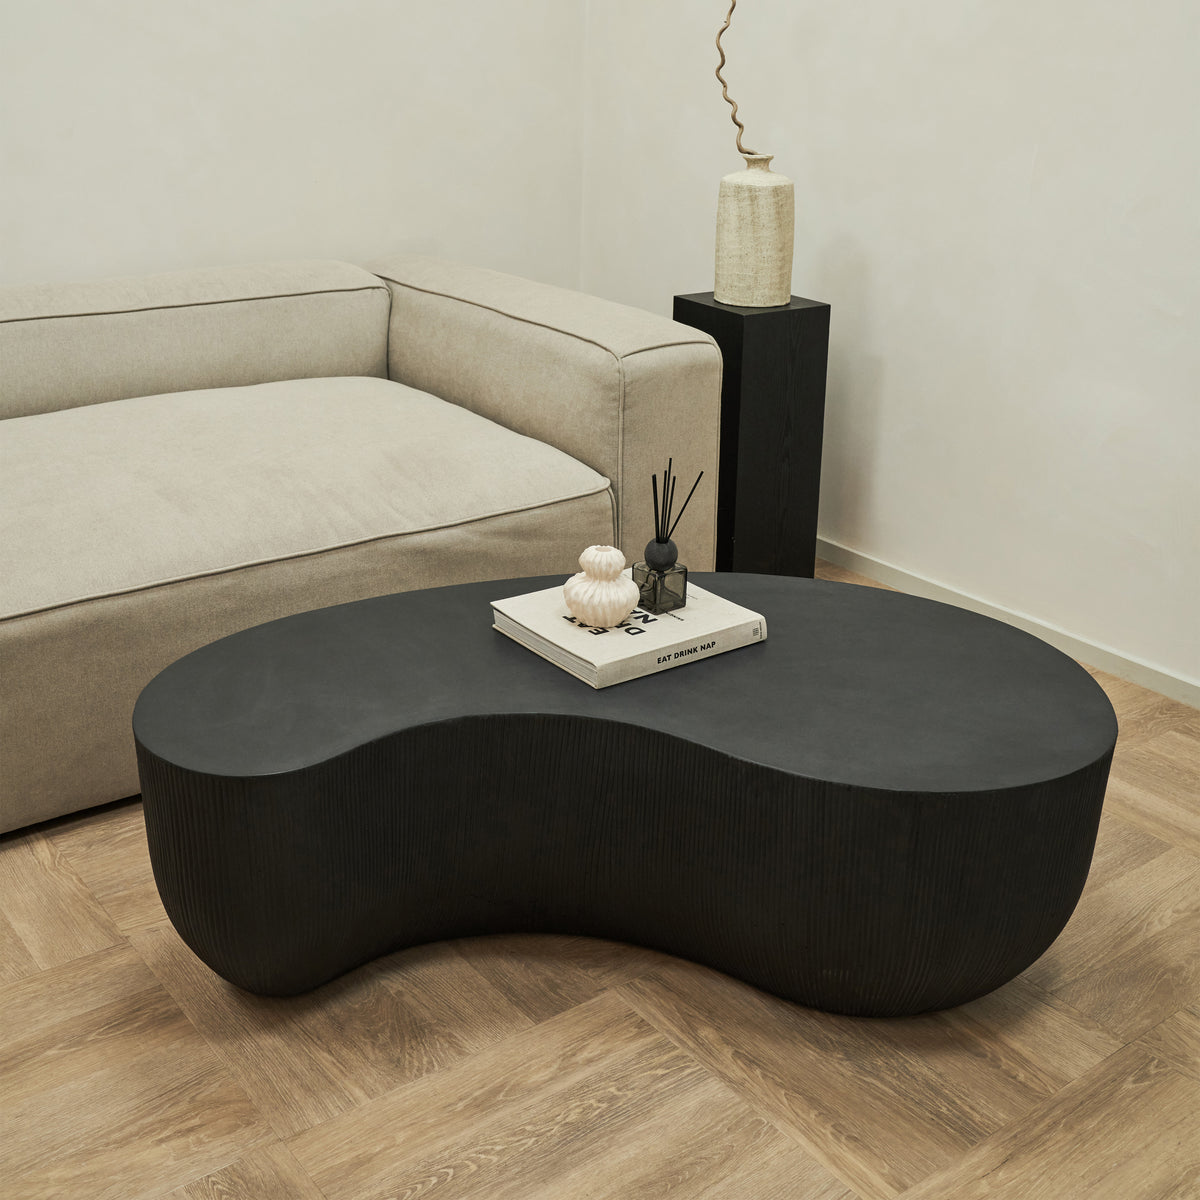 Minimal Onyx Shaped Coffee Table Large in living room